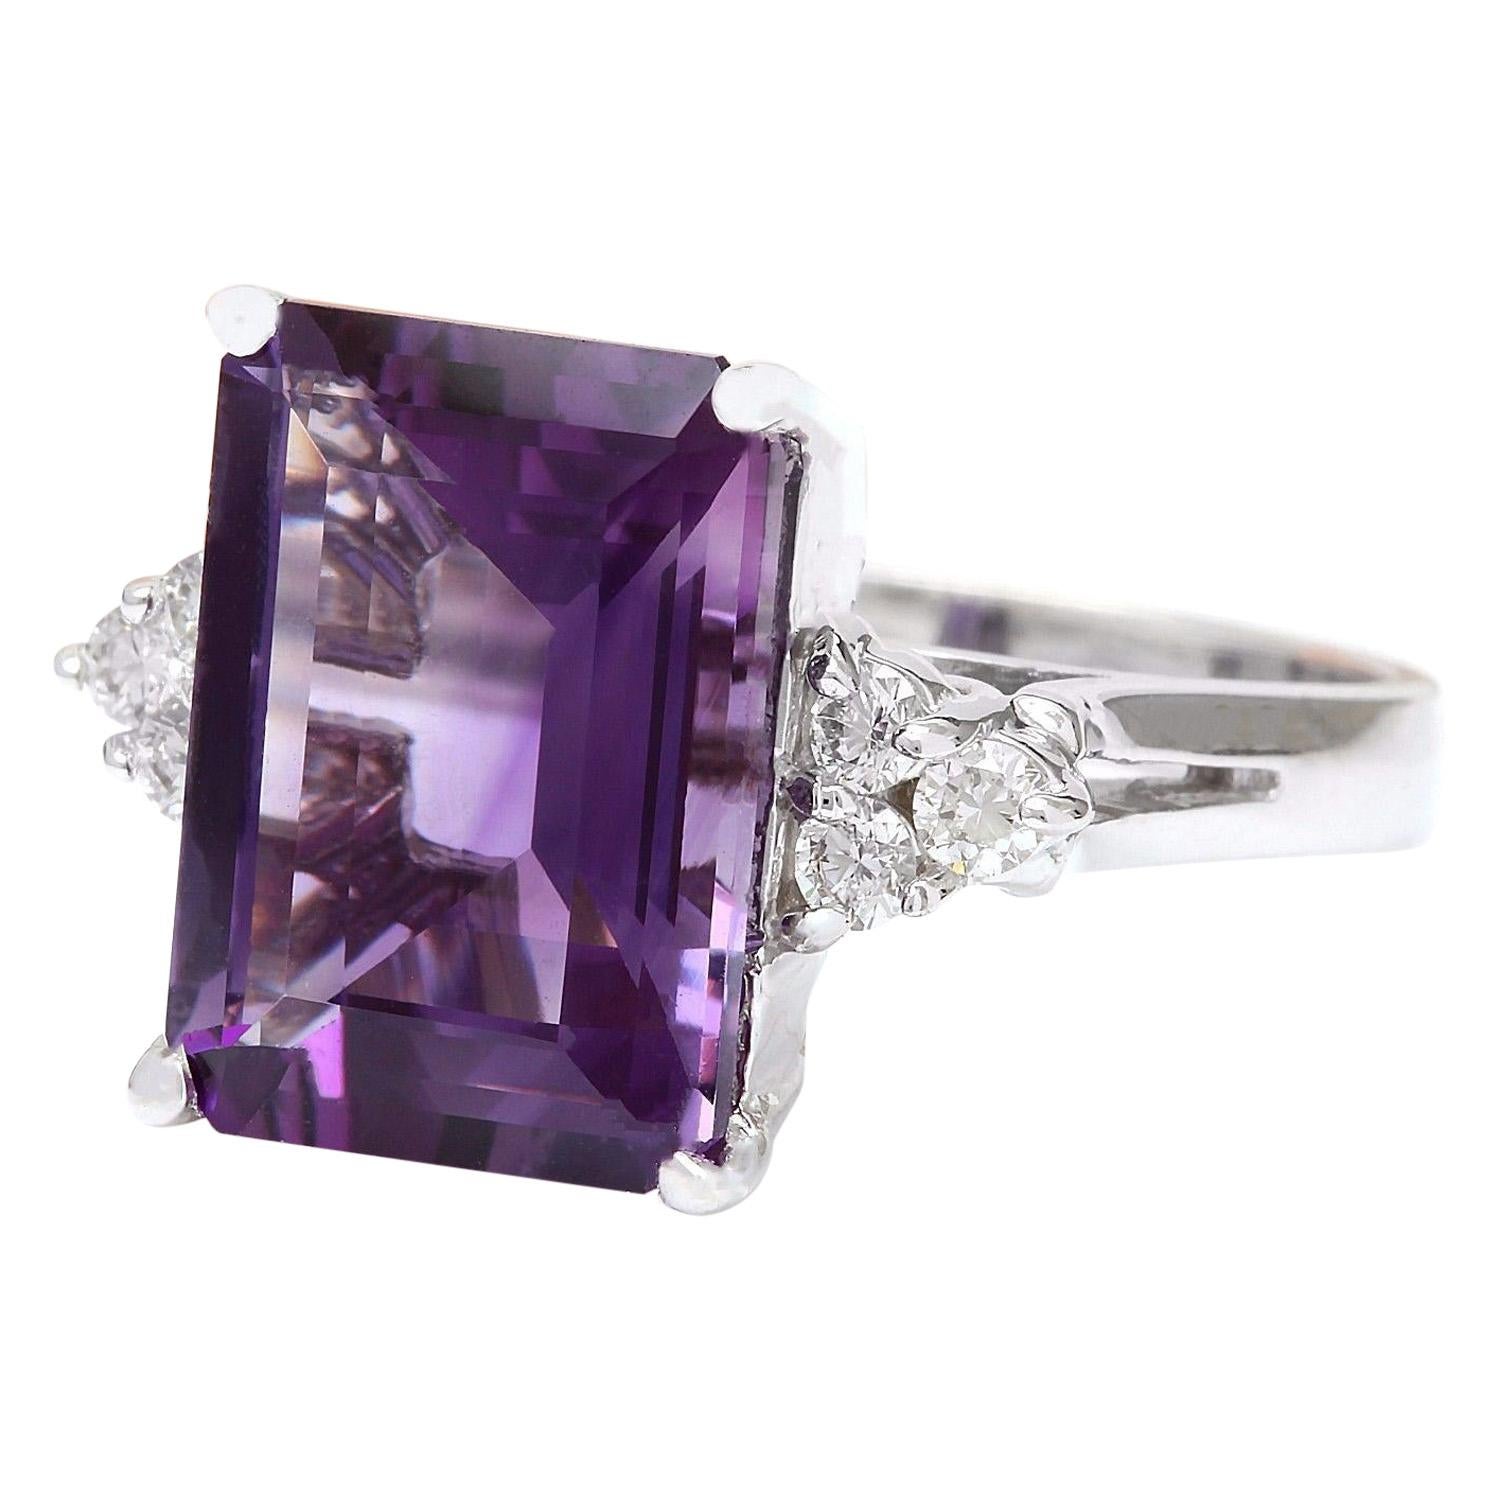 7.55 Carat Natural Amethyst 14K Solid White Gold Diamond Ring
 Item Type: Ring
 Item Style: Cocktail
 Material: 14K White Gold
 Mainstone: Amethyst
 Stone Color: Purple
 Stone Weight: 6.25 Carat
 Stone Shape: Emerald
 Stone Quantity: 1
 Stone